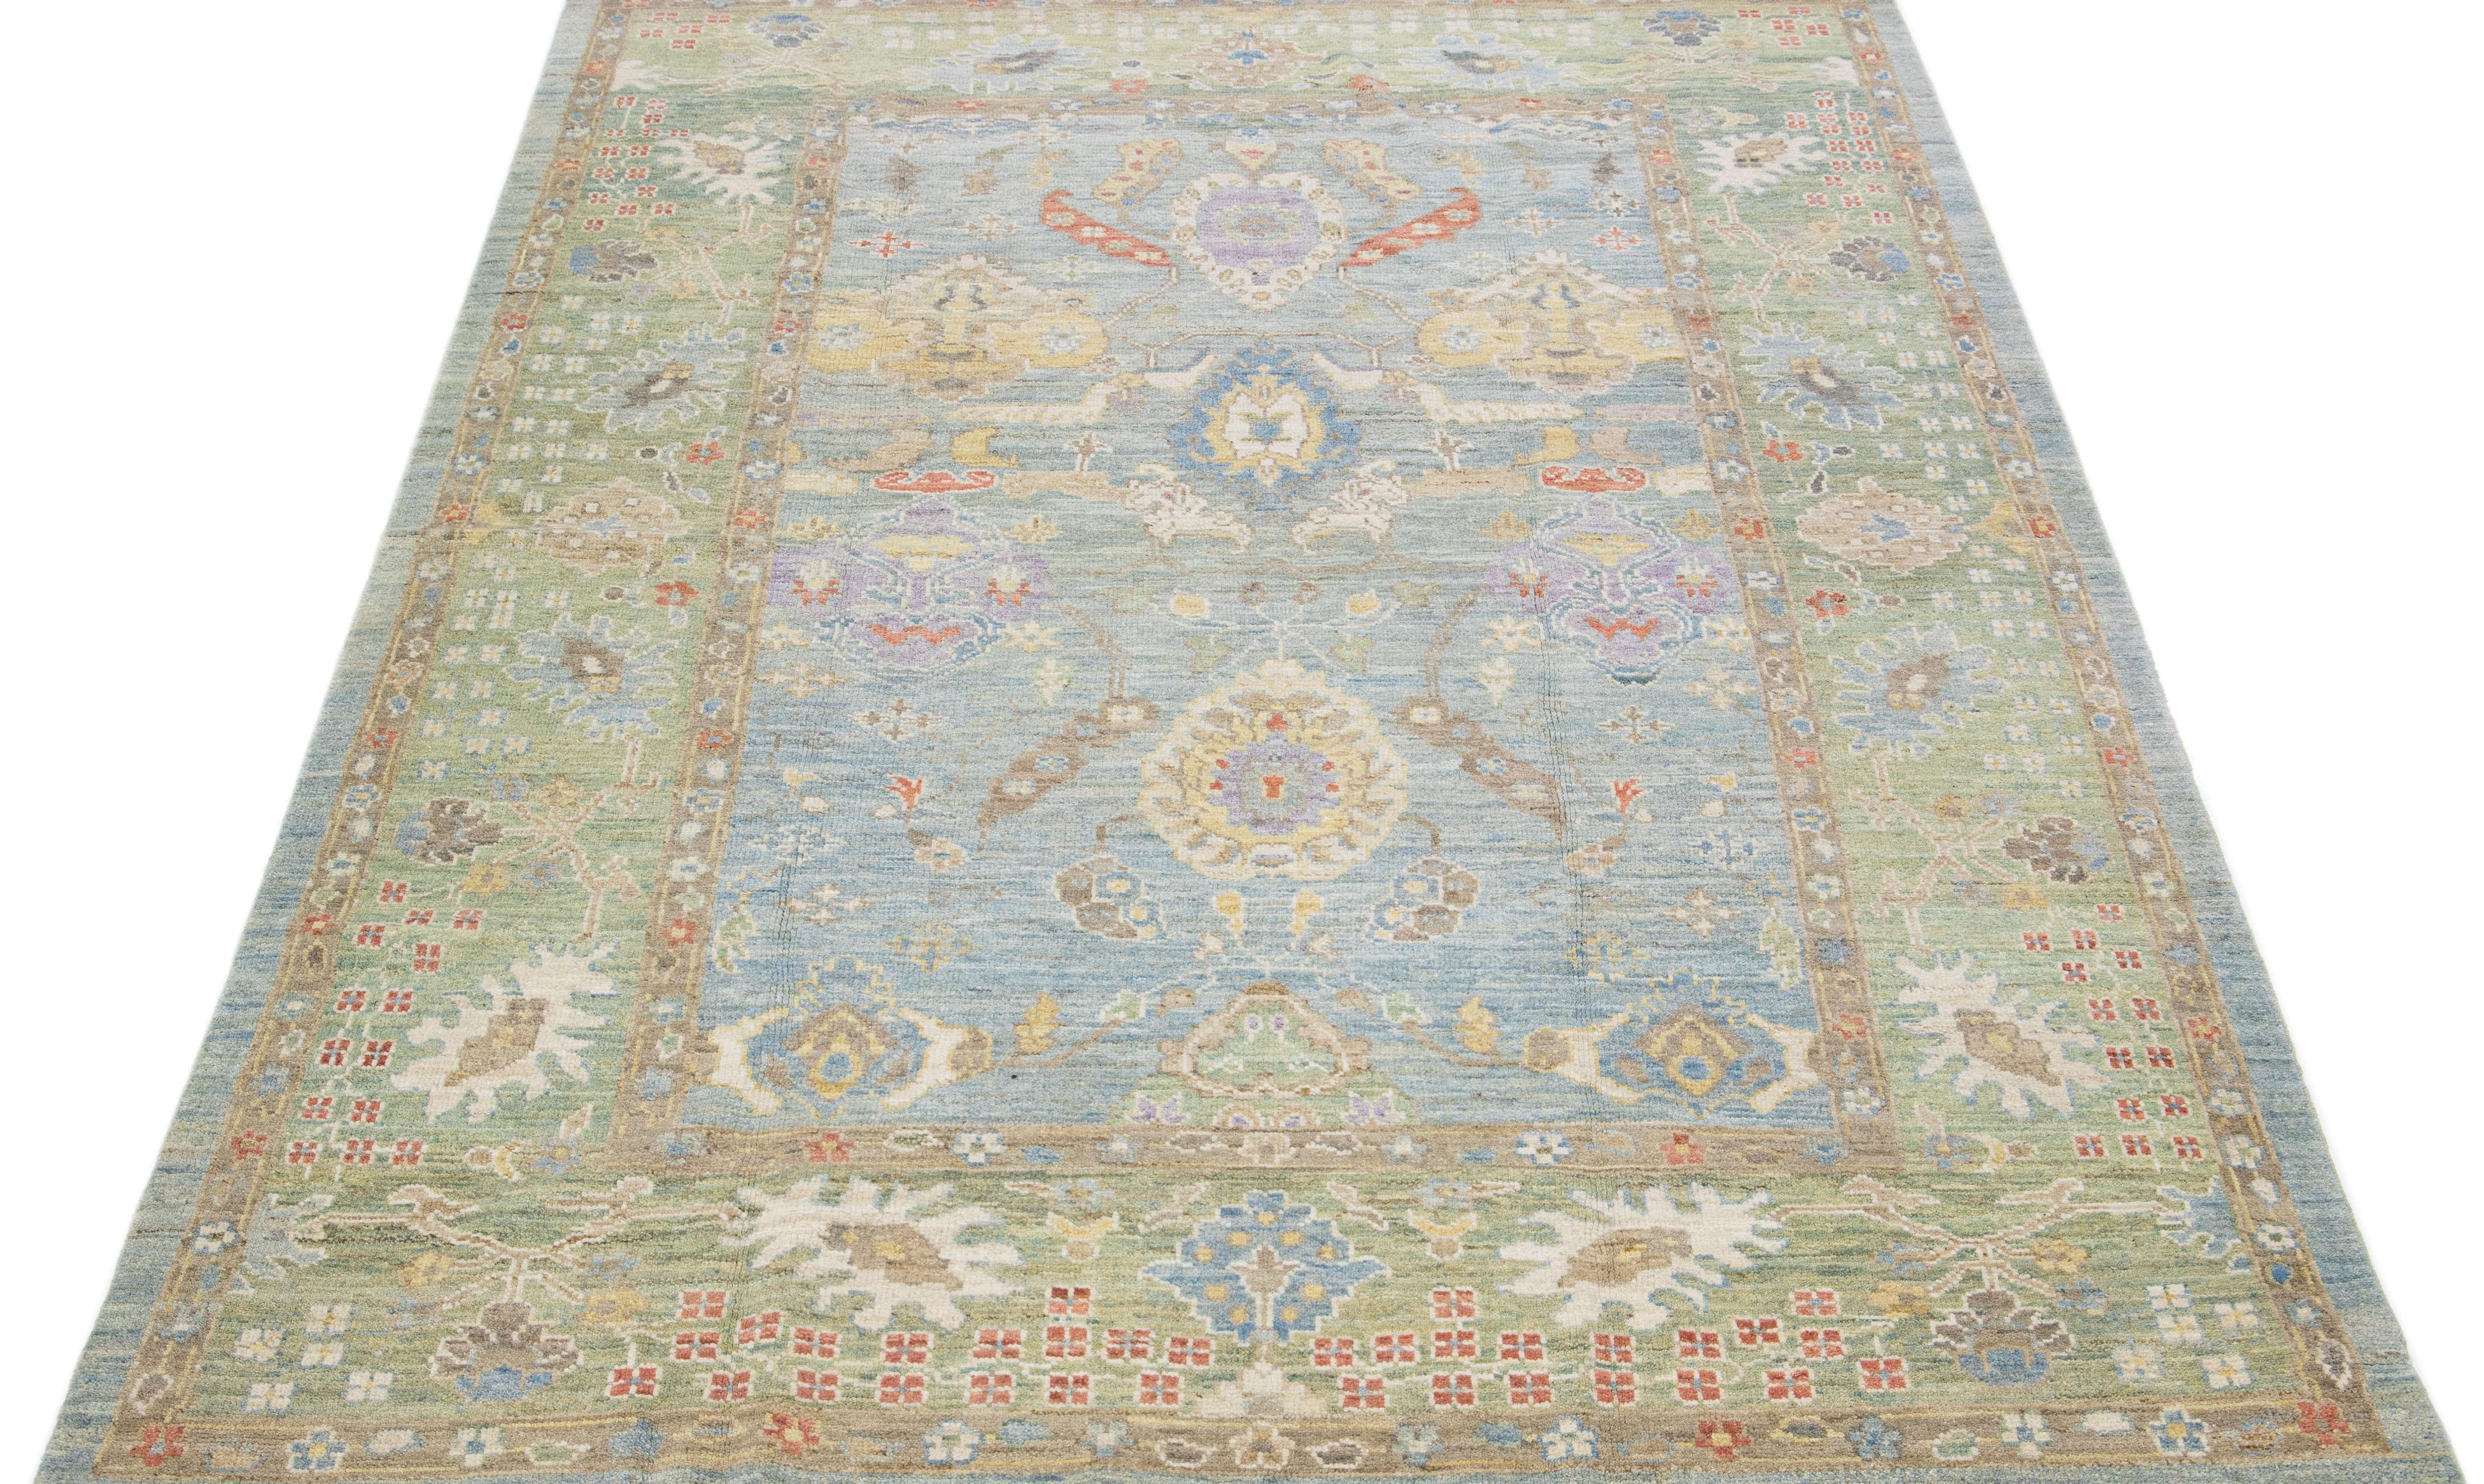 Beautiful modern Oushak style hand knotted wool rug with a blue color field. This Piece has a green frame with bright accent colors in a gorgeous all-over floral design.

This rug measures: 6'9